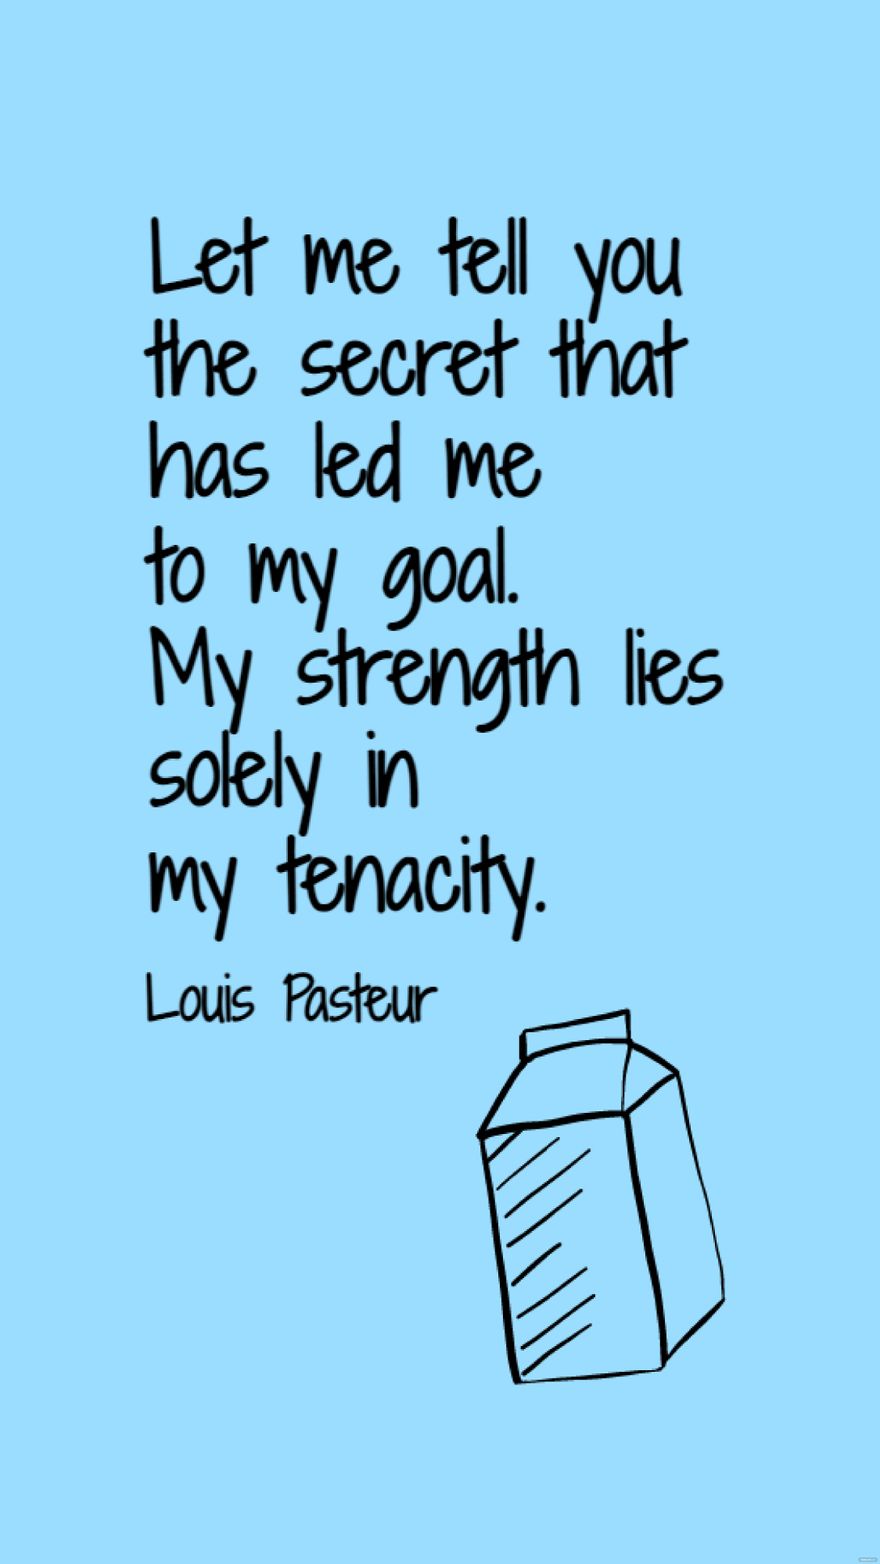 Free Louis Pasteur - Let me tell you the secret that has led me to my goal. My strength lies solely in my tenacity. in JPG